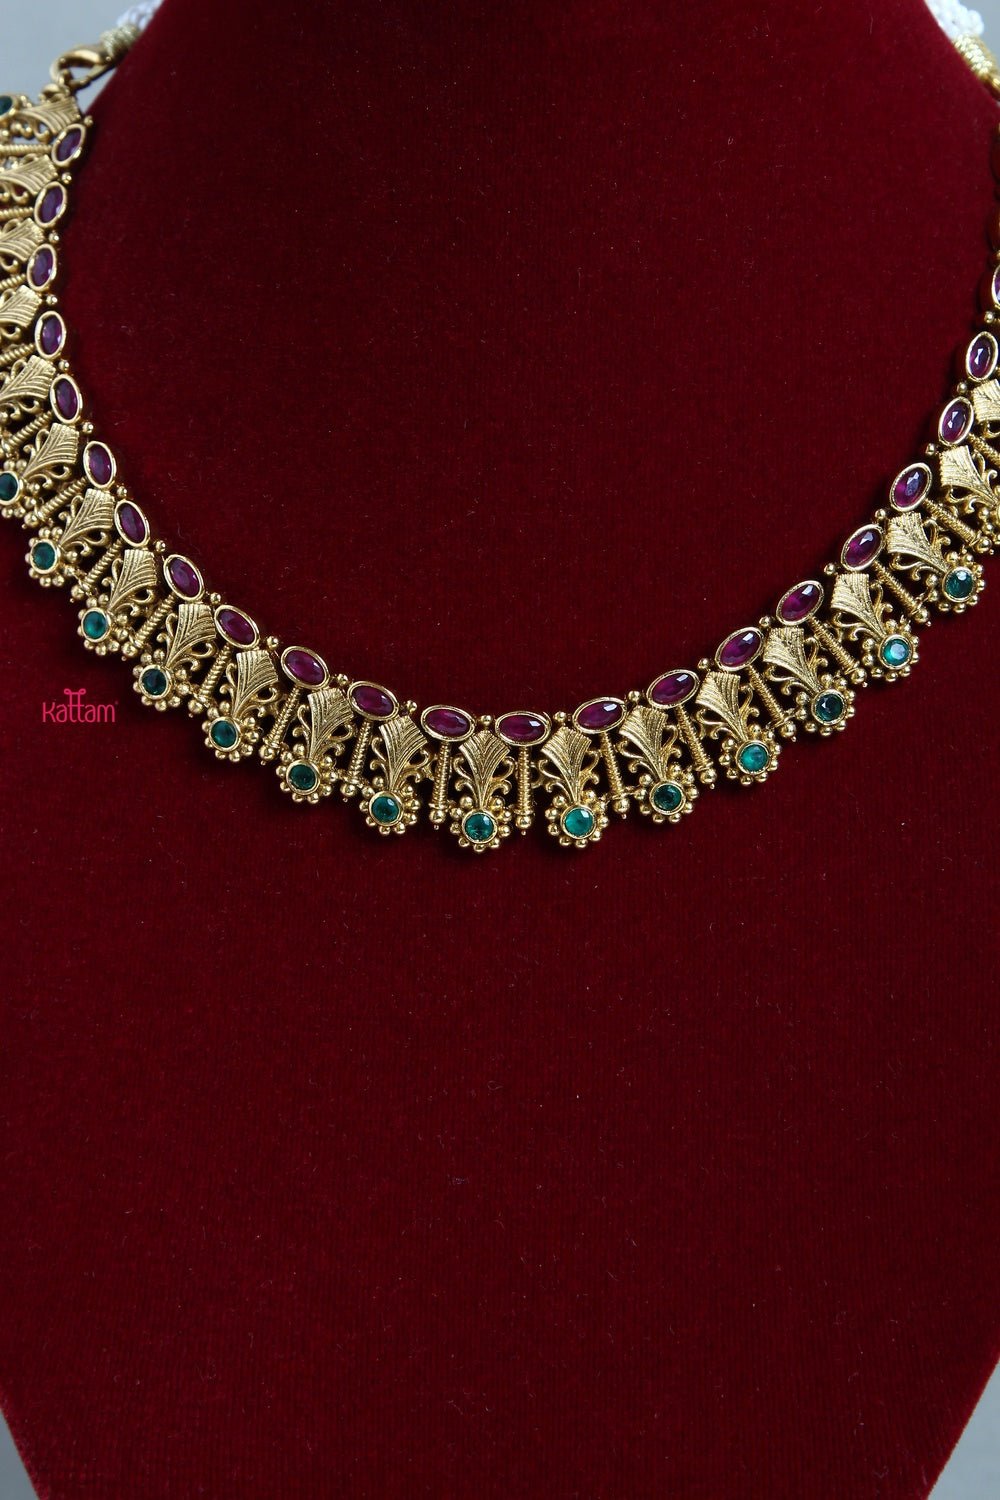 Ethnic Green Ruby Choker Necklace - N1208